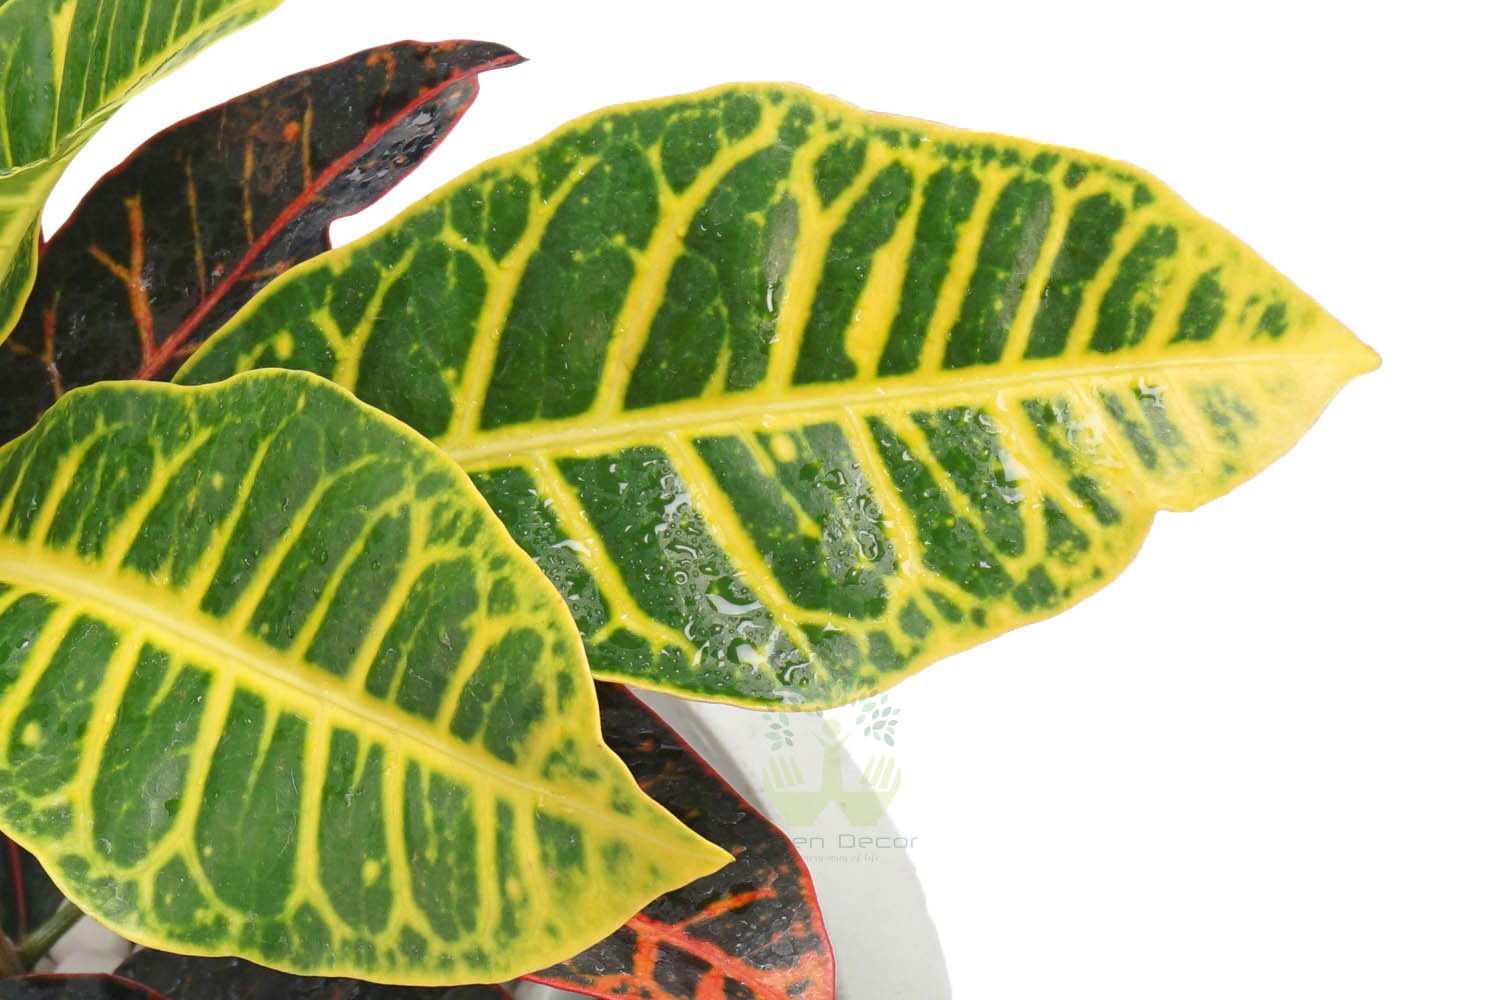 Buy Croton Variegatum Petra Plants , White Pots and seeds in Delhi NCR by the best online nursery shop Greendecor.